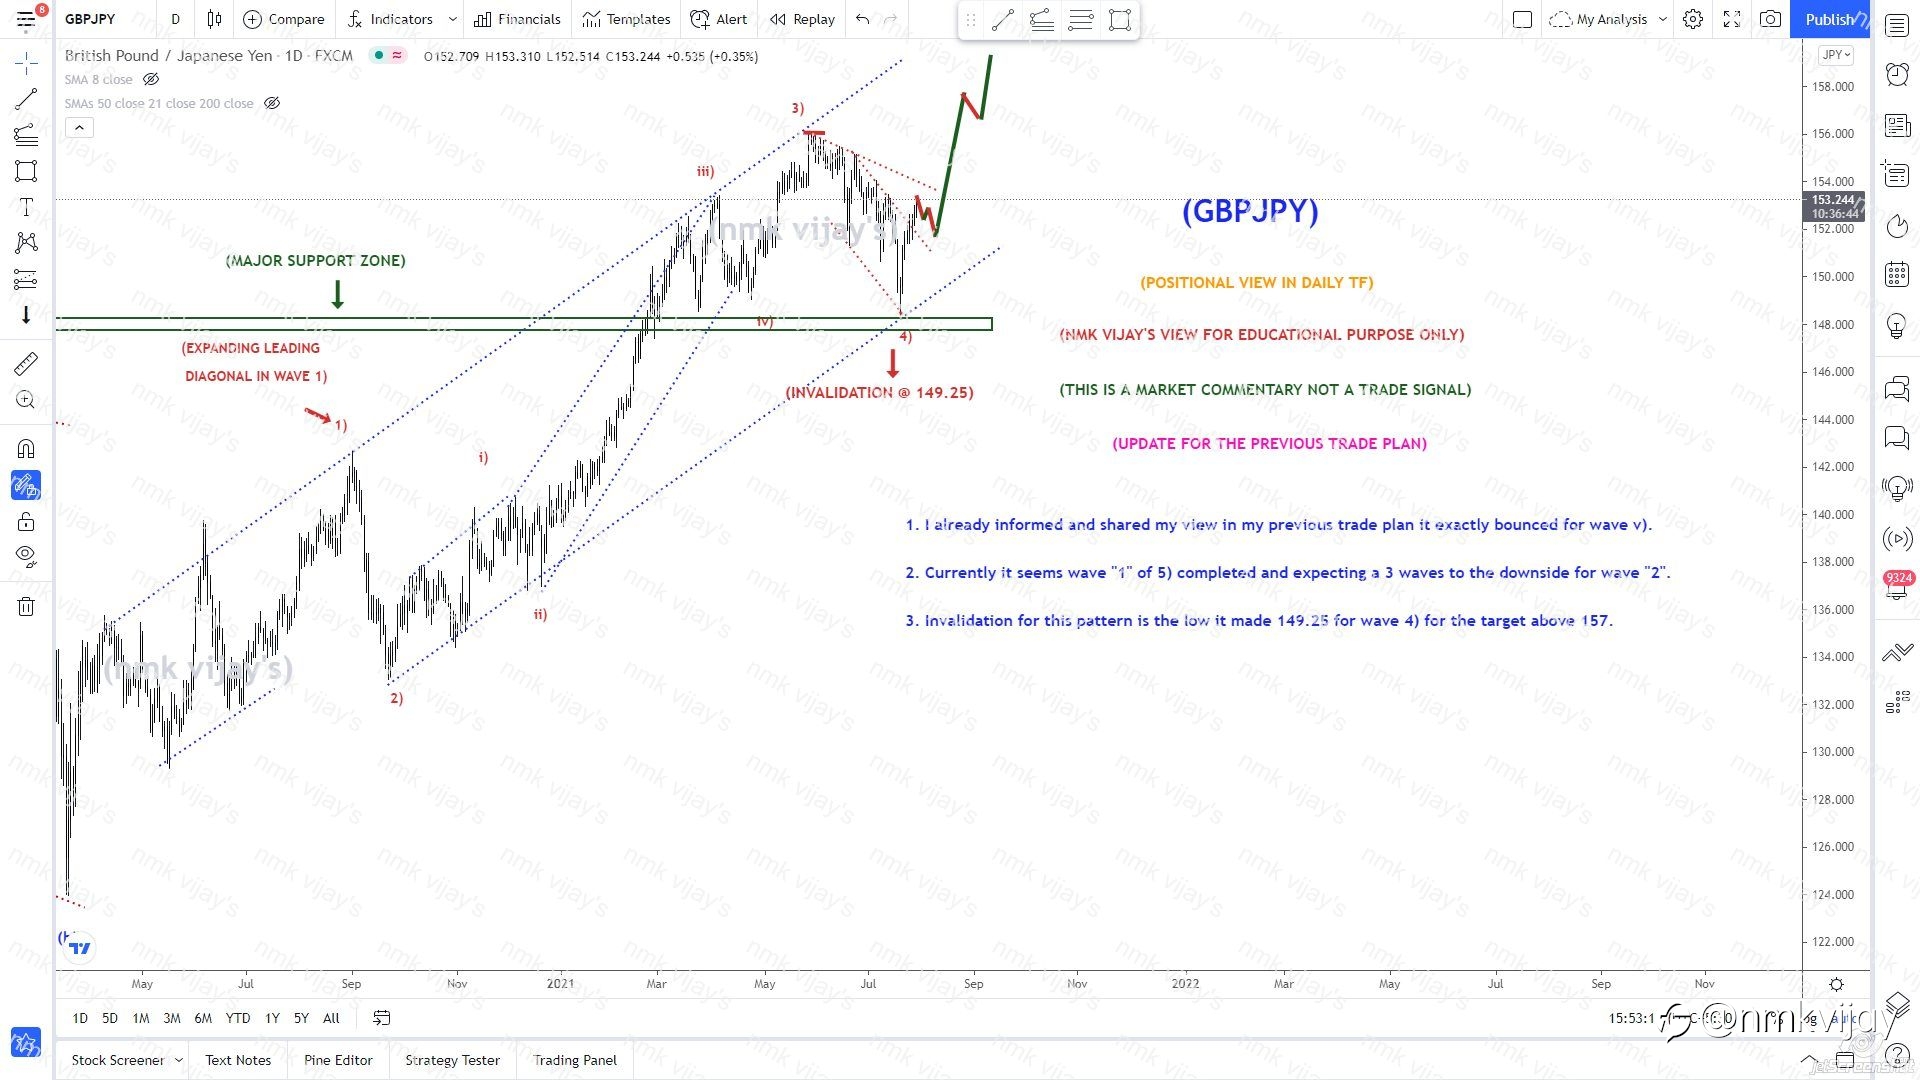 GBPJPY-Seems wave 1 of 5) completed and wave 2 will soon...